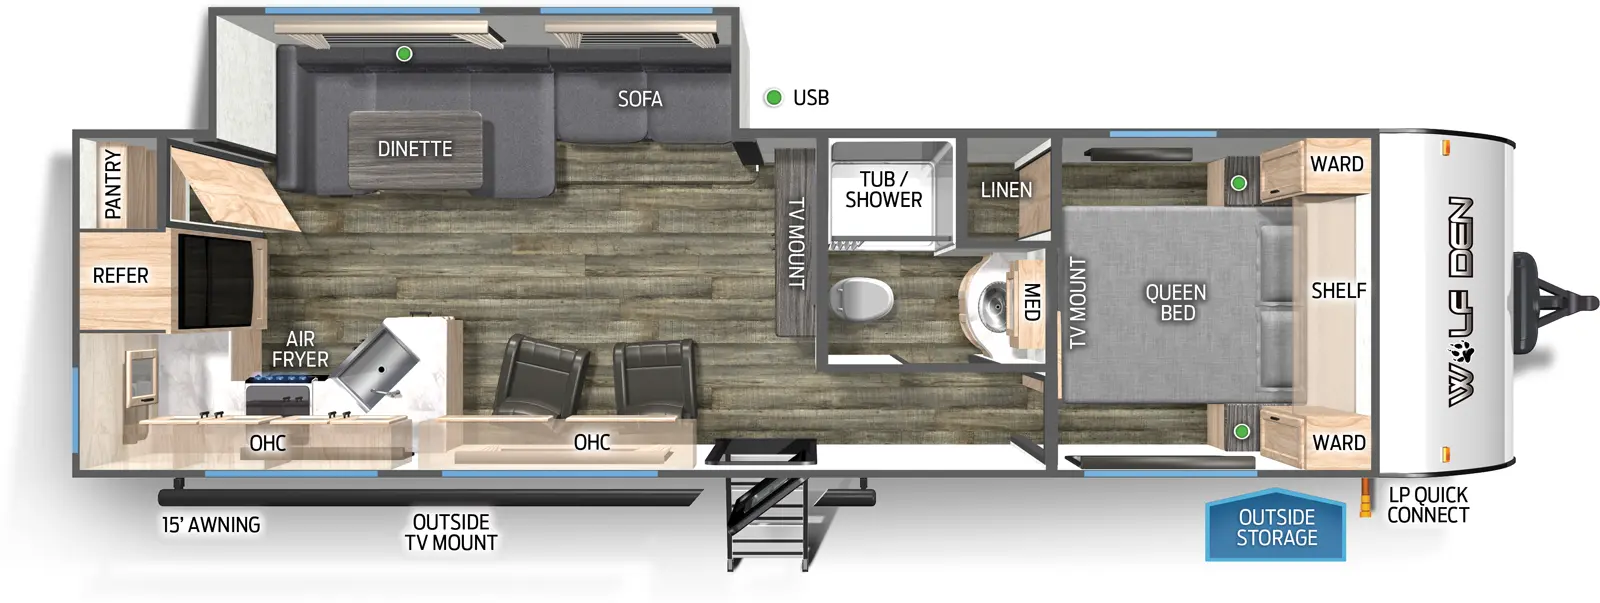 The 272RK has one slideout and one entry. Exterior features LP quick connect, outside storage, outside TV mount, and 15 foot awning. Interior layout front to back: foot-facing queen bed with shelf above, wardrobes on each side, linen closet, and TV mount; off-door side full bathroom with medicine cabinet; TV mount along inner wall; off-door side slideout with sofa and dinette; door side entry, chairs, overhead cabinet, and kitchen counter with sink that wraps to door side with air fryer, overhead cabinet, and continues to wrap to the rear with a refrigerator and pantry.